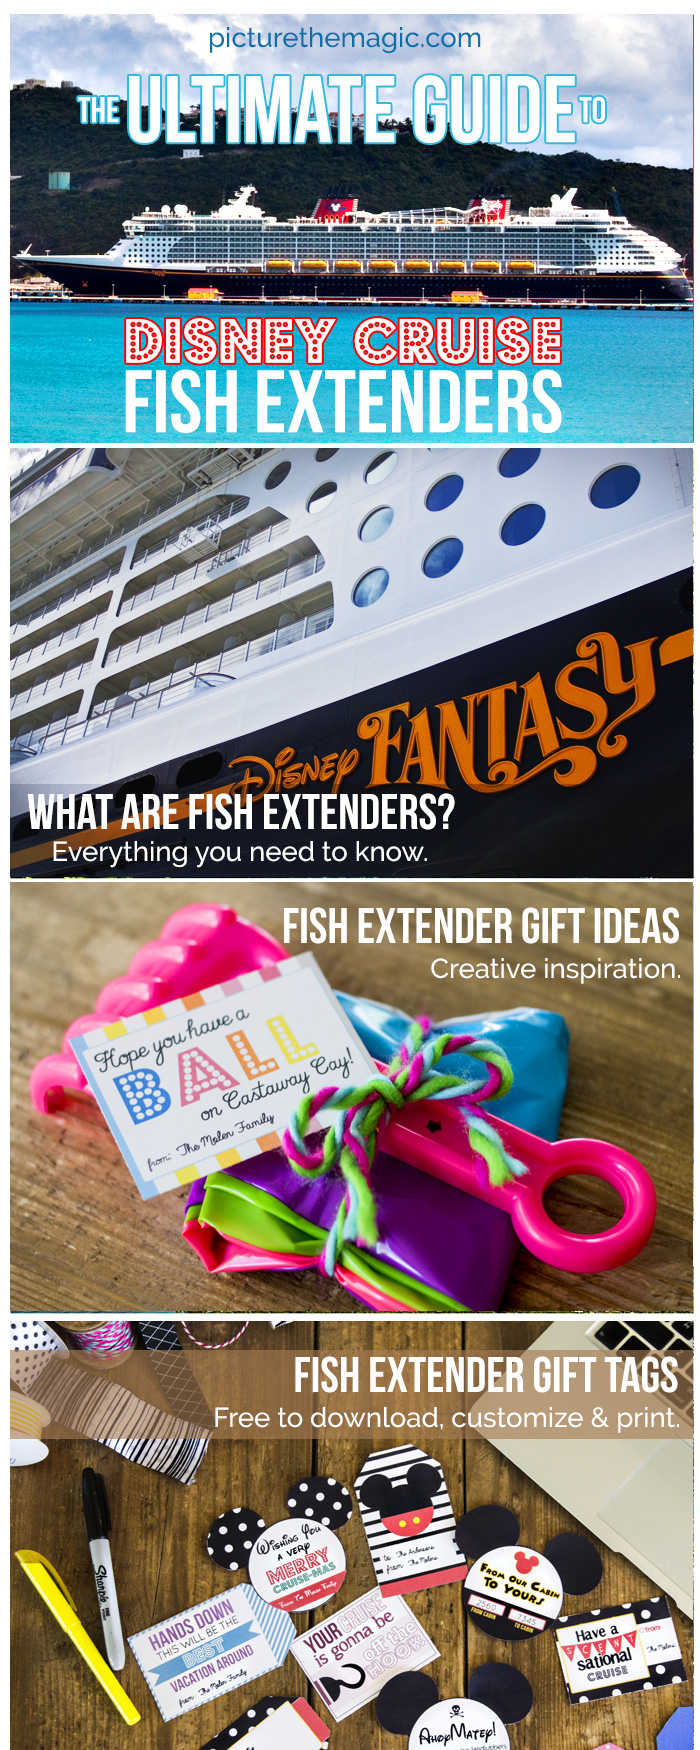 The Ultimate Guide to Disney Cruise Fish Extenders